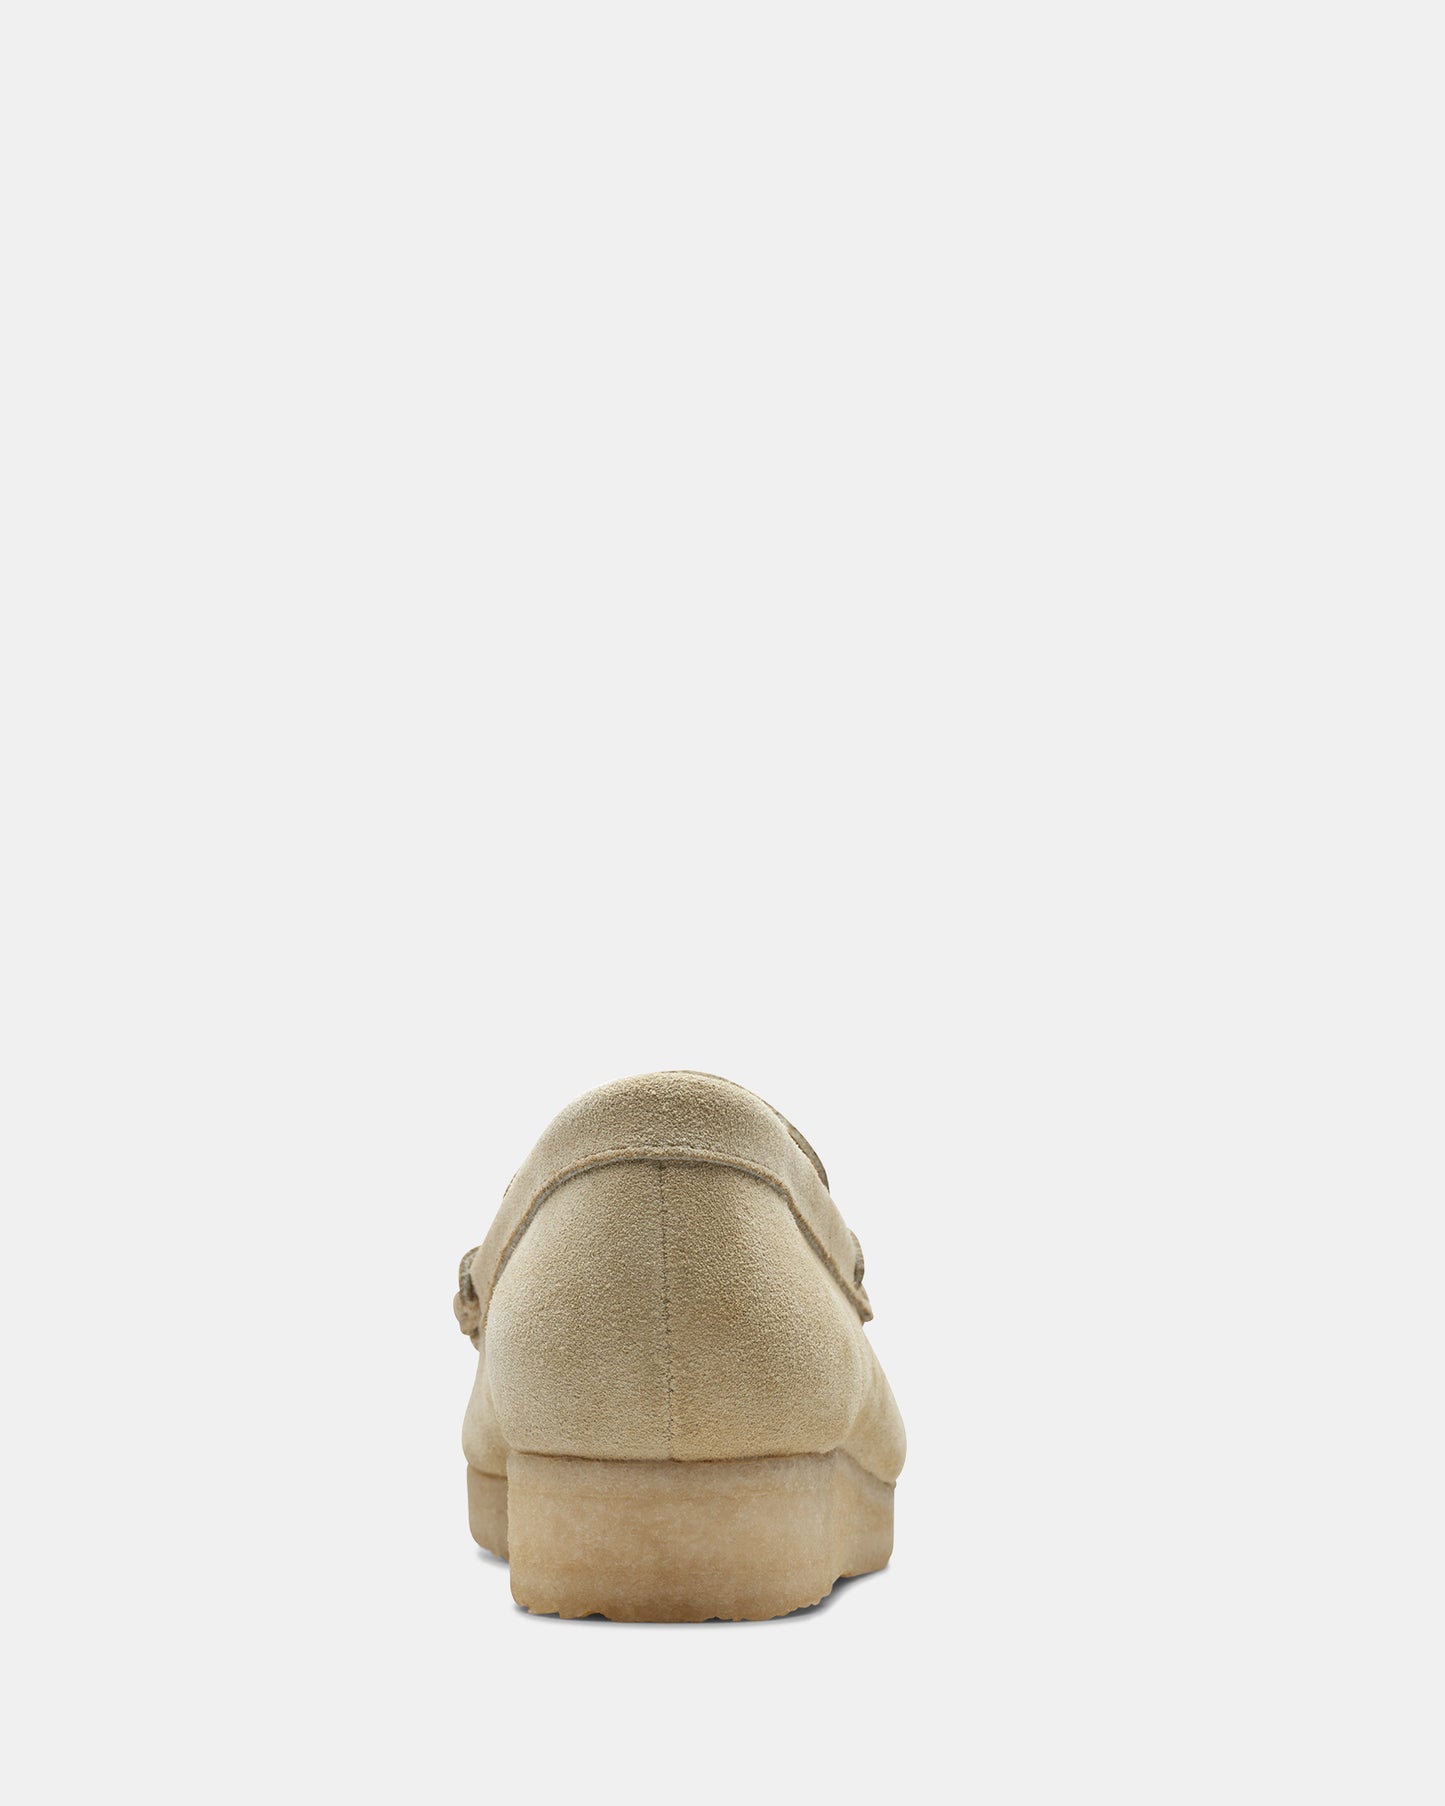 Wallabee Loafer Maple Suede